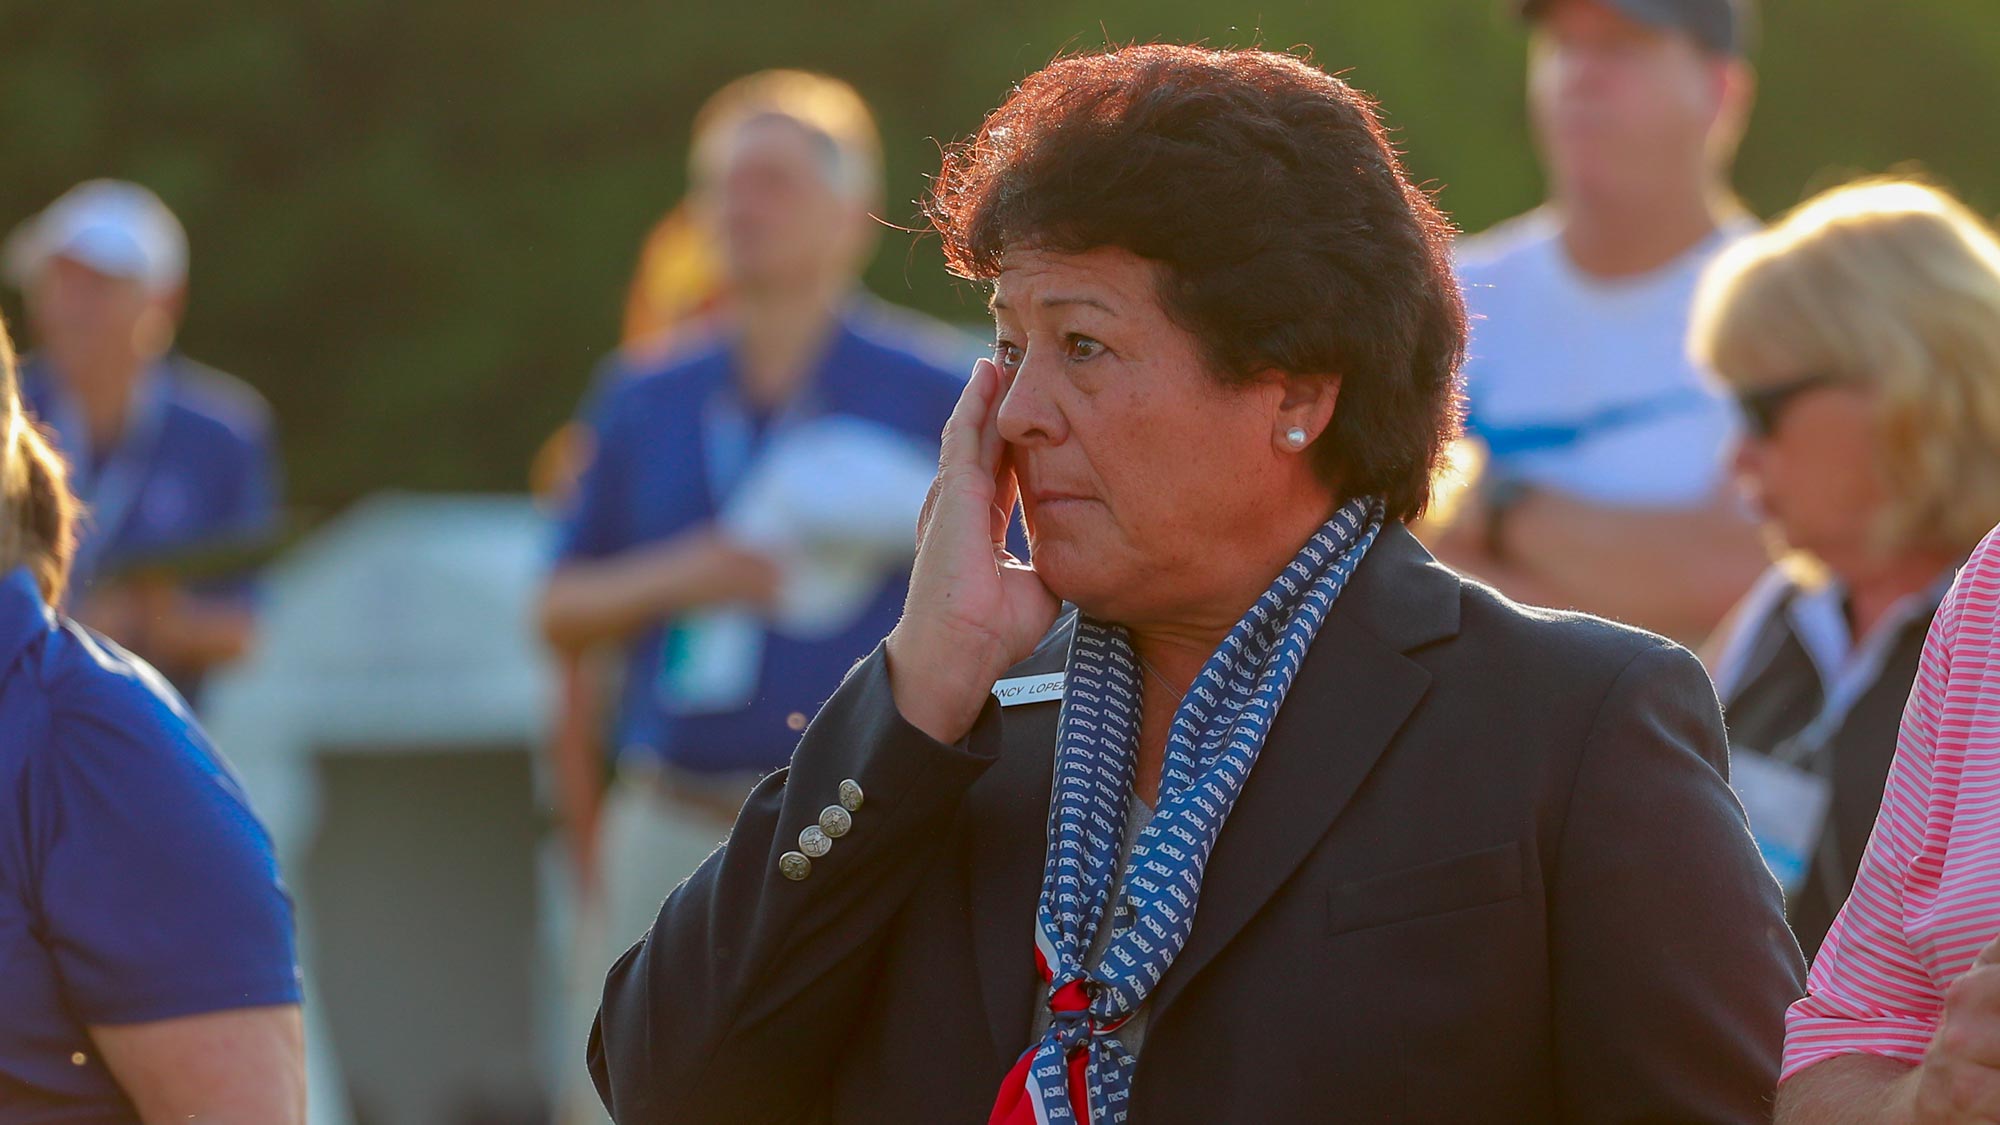 Nancy Lopez was the honorary starter at the inaugural U.S. Women's Senior Open 